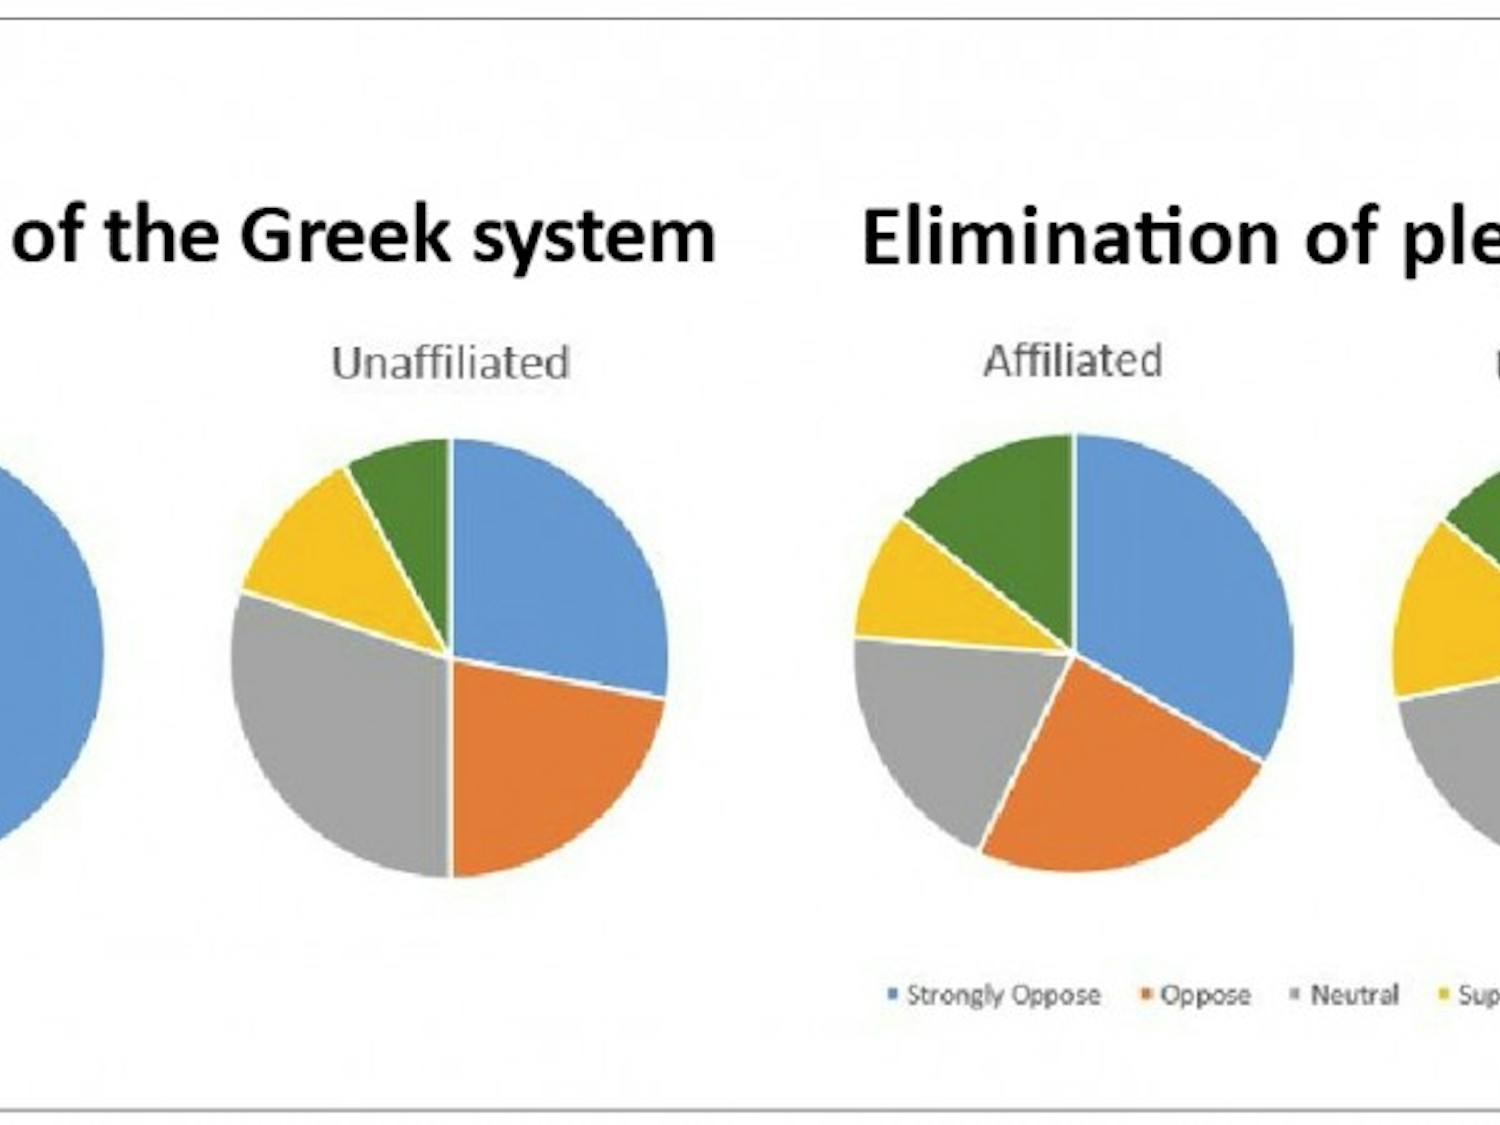 Of students surveyed, more than half opposed eradicating the Greek system.